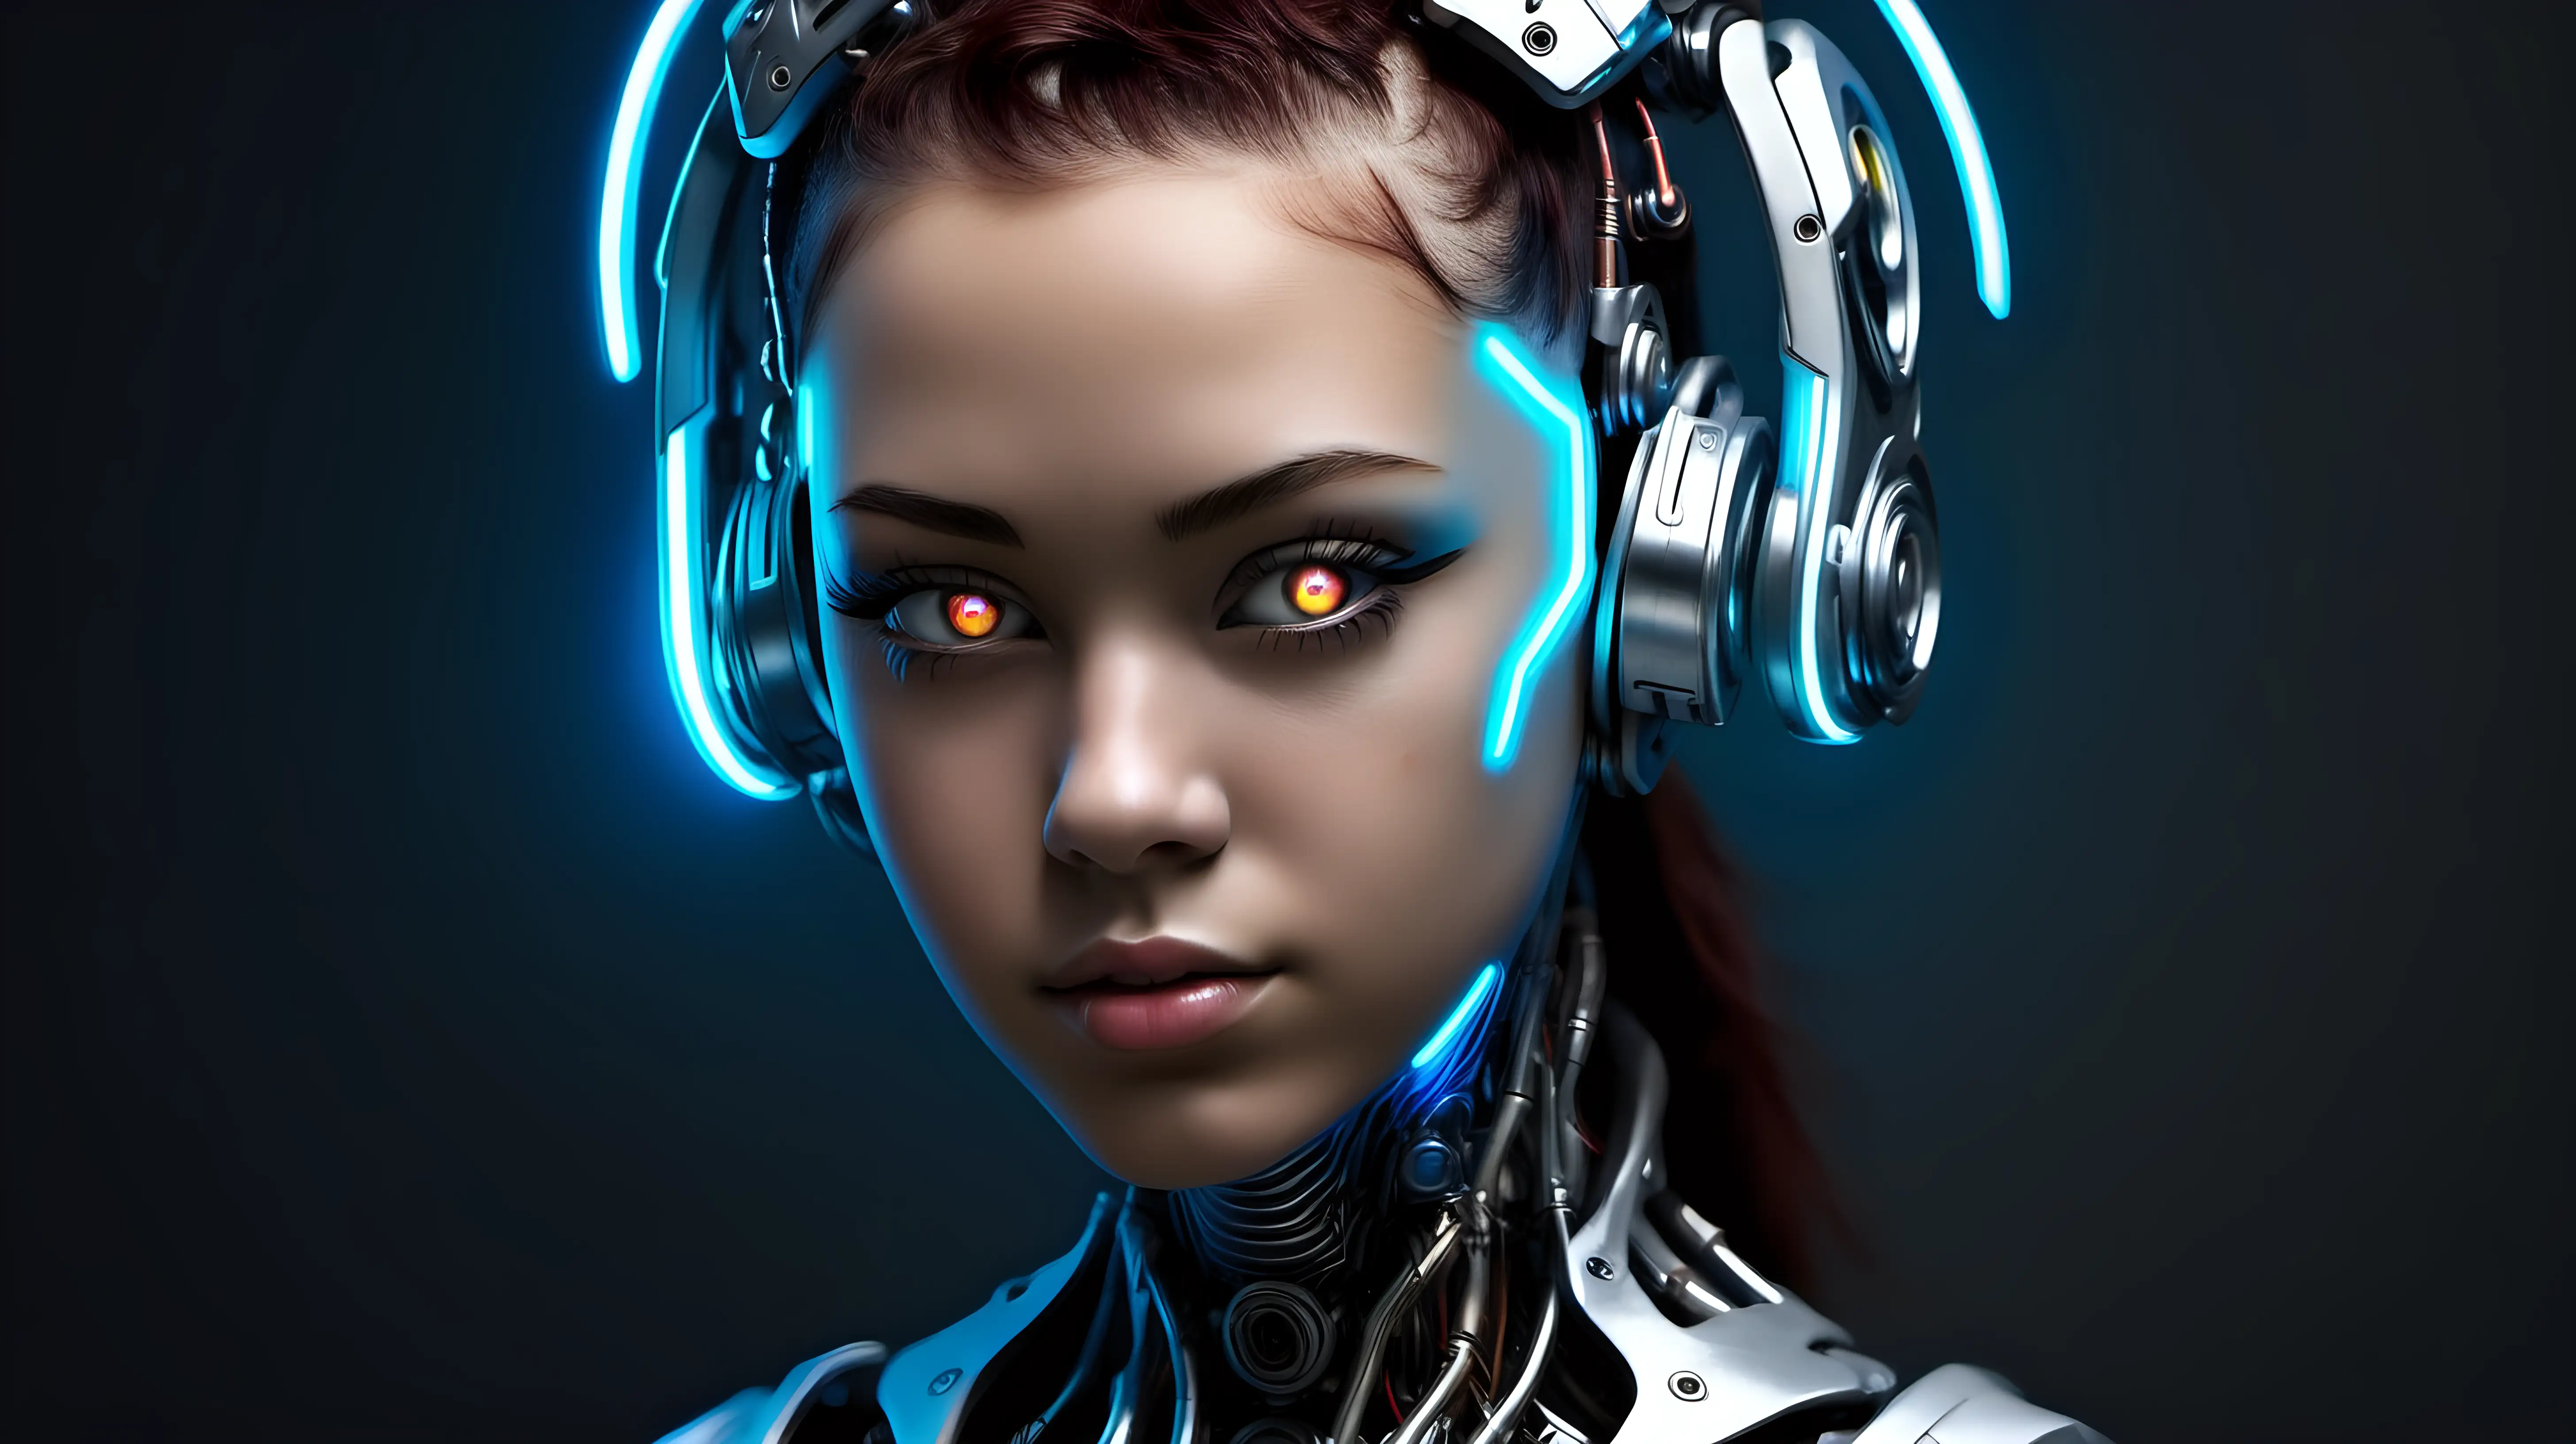 Beautiful Cyborg Woman with Neon Accents